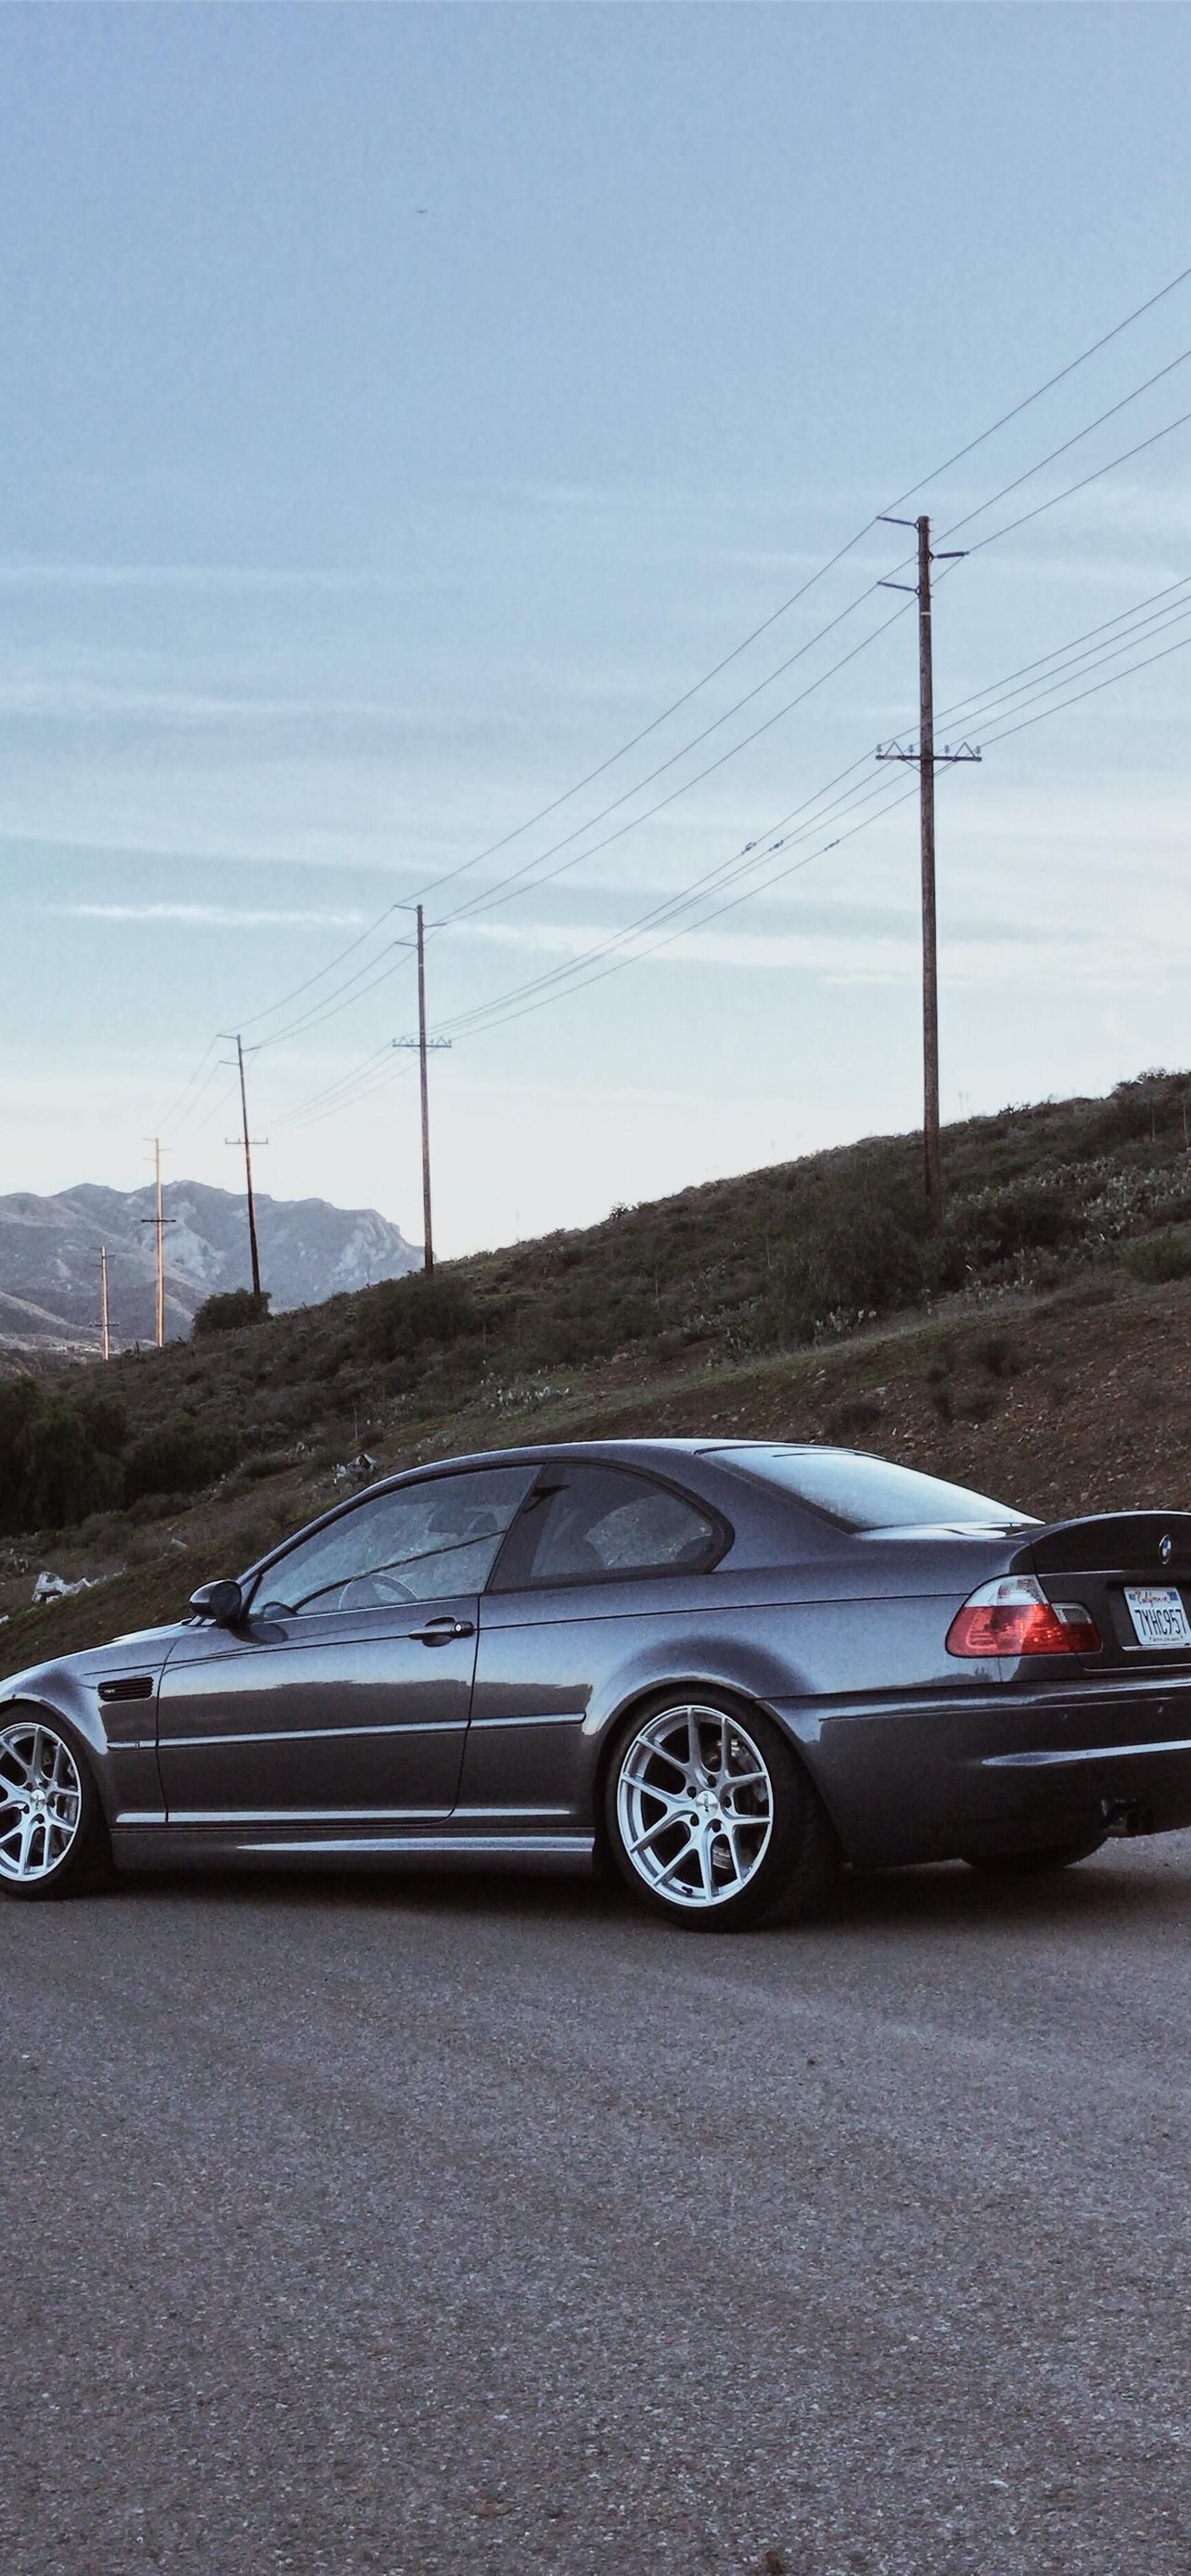 BMW E46 Coupe iPhone Wallpapers - Wallpaper Cave